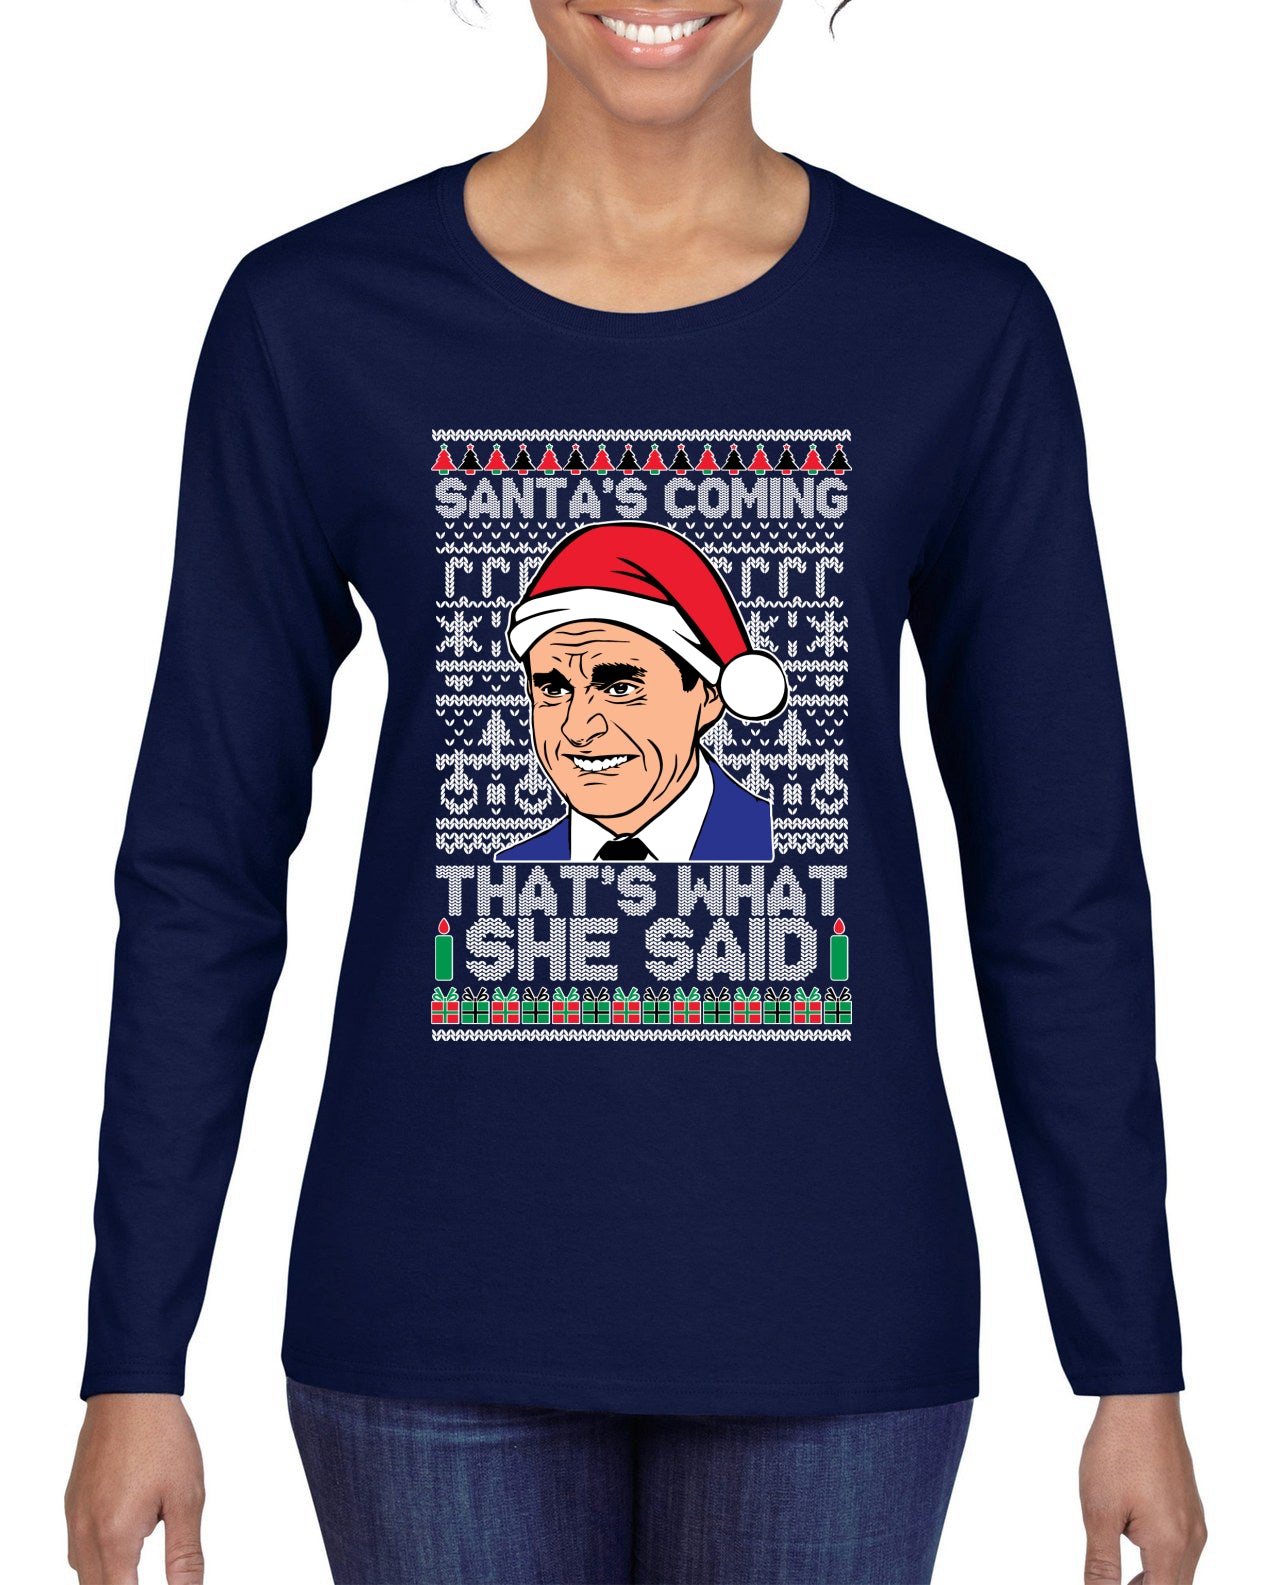 Santas Coming That's What She Said Michael Scott Ugly Christmas Sweater Womens Graphic Long Sleeve T-Shirt